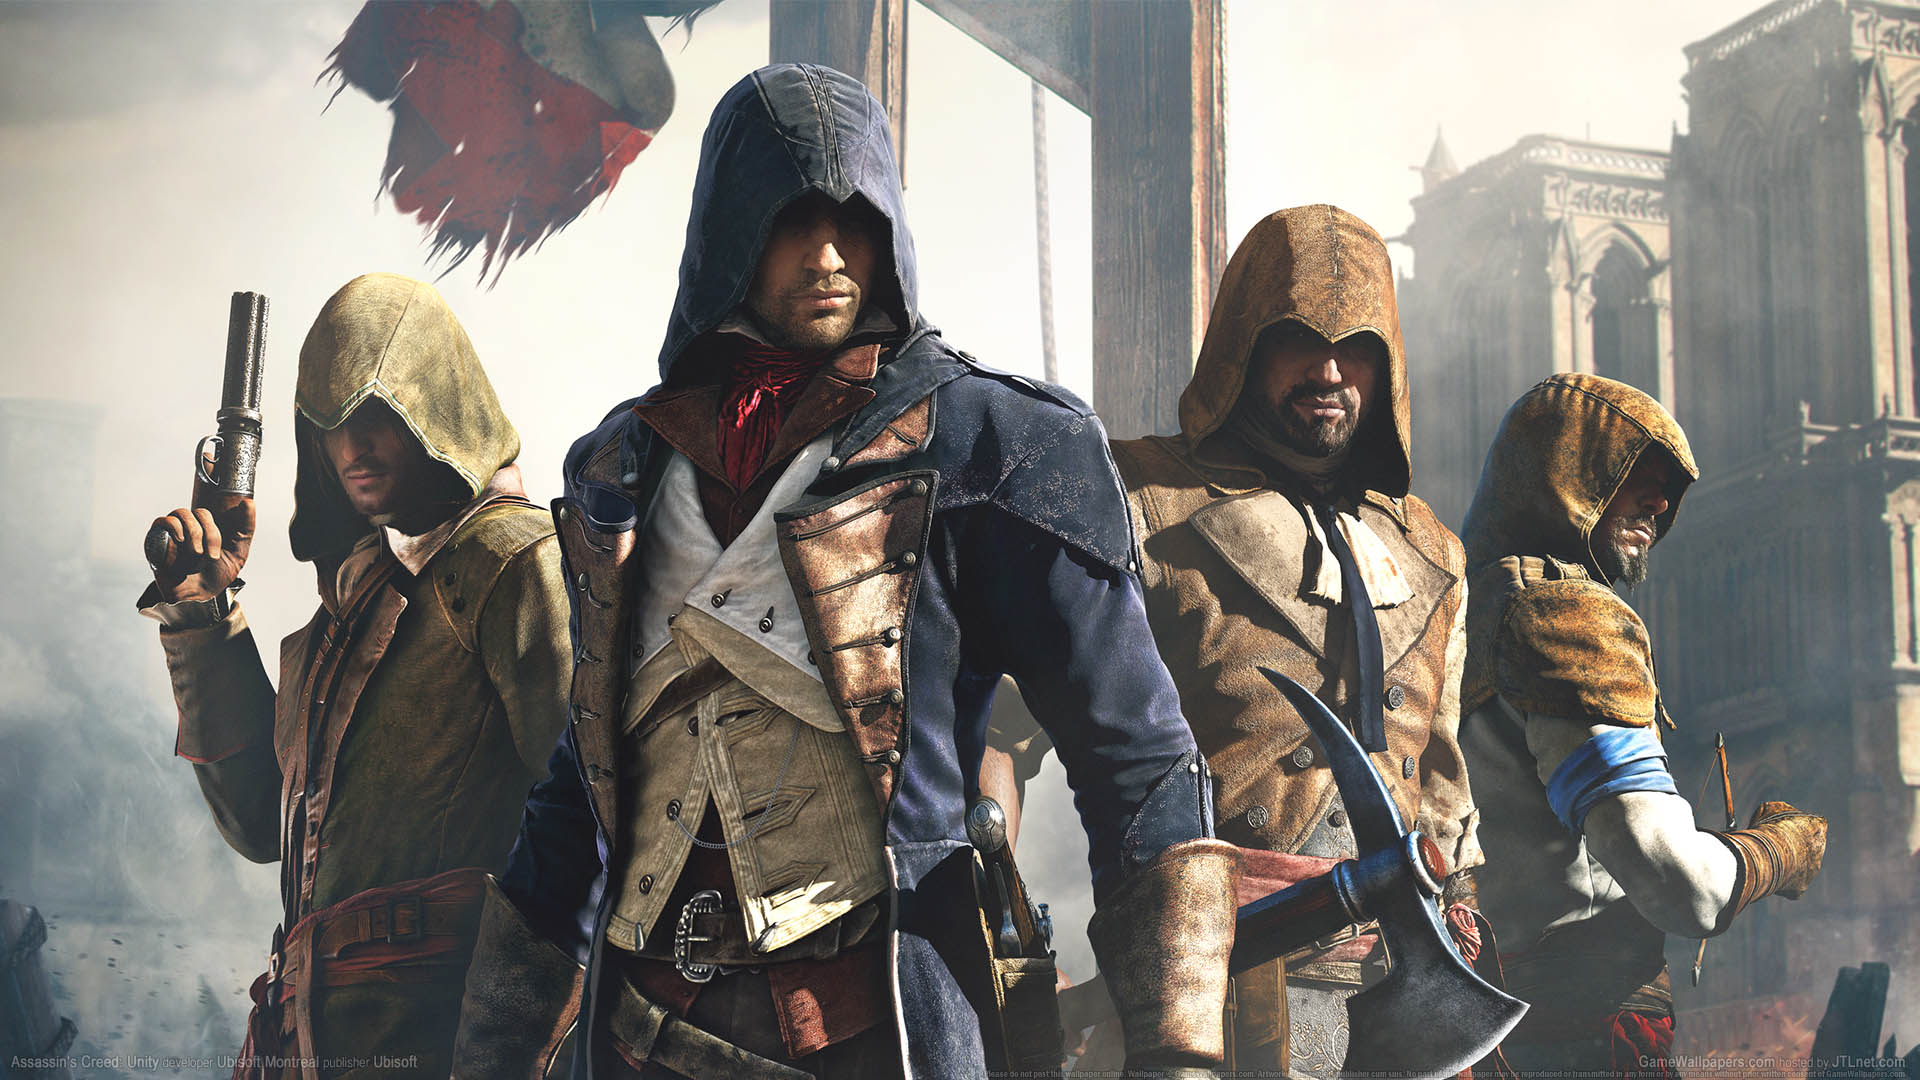 Assassin's Creed: Unity achtergrond 15 1920x1080